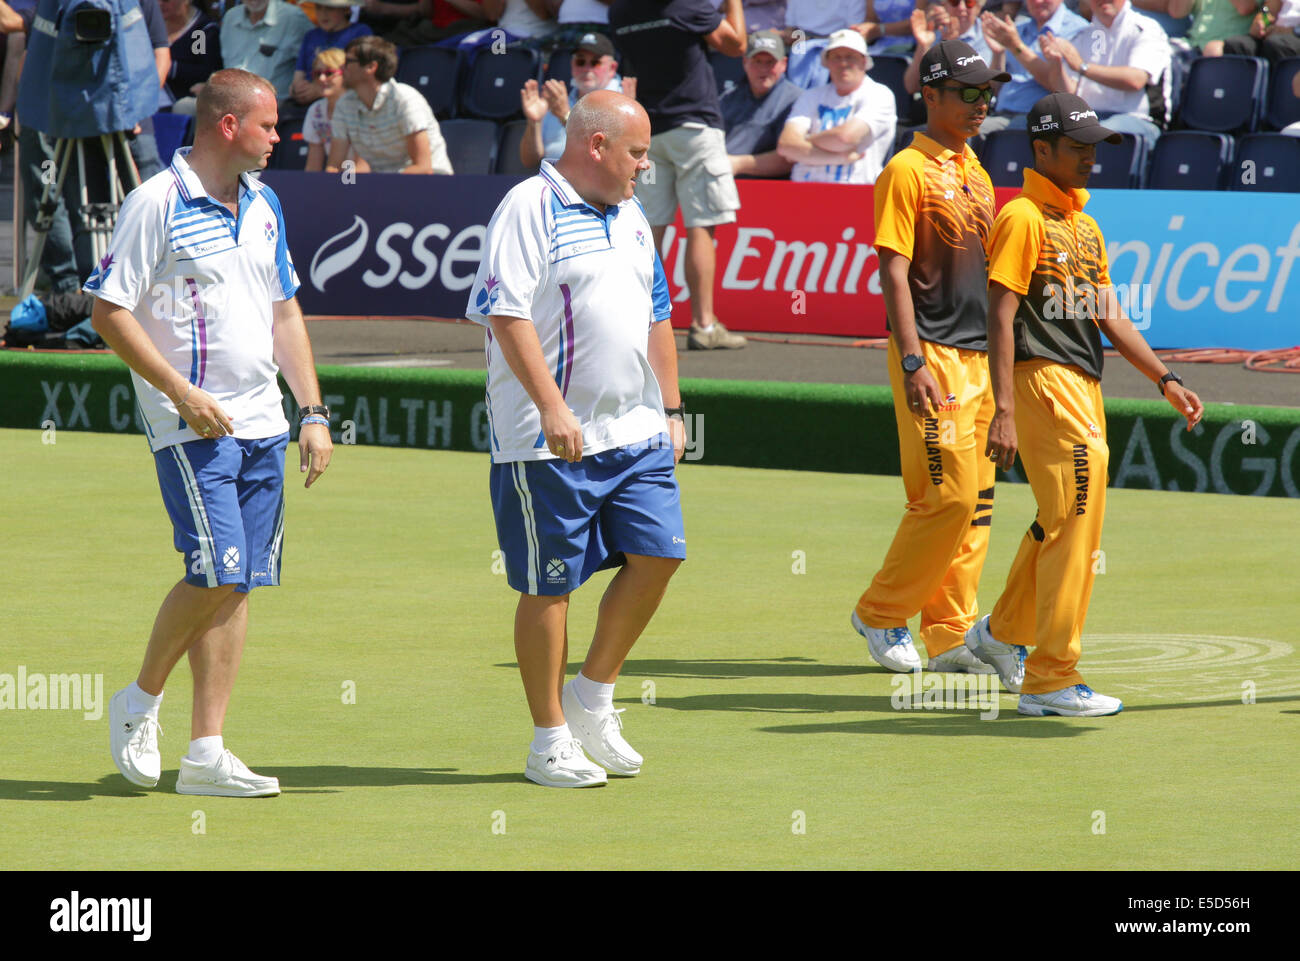 Kelvingrove Lawn Bowls Centre, Glasgow, Scotland, UK, Monday, 28th July, 2014. The Men's Lawn Bowls Pairs Final between Scotland's Paul Foster and Alex Marshall and Malaysia's Muhammad Hizlee Abdul Rais and Fairul Izwan Abd Muin at the Glasgow 2014 Commonwealth Games Stock Photo